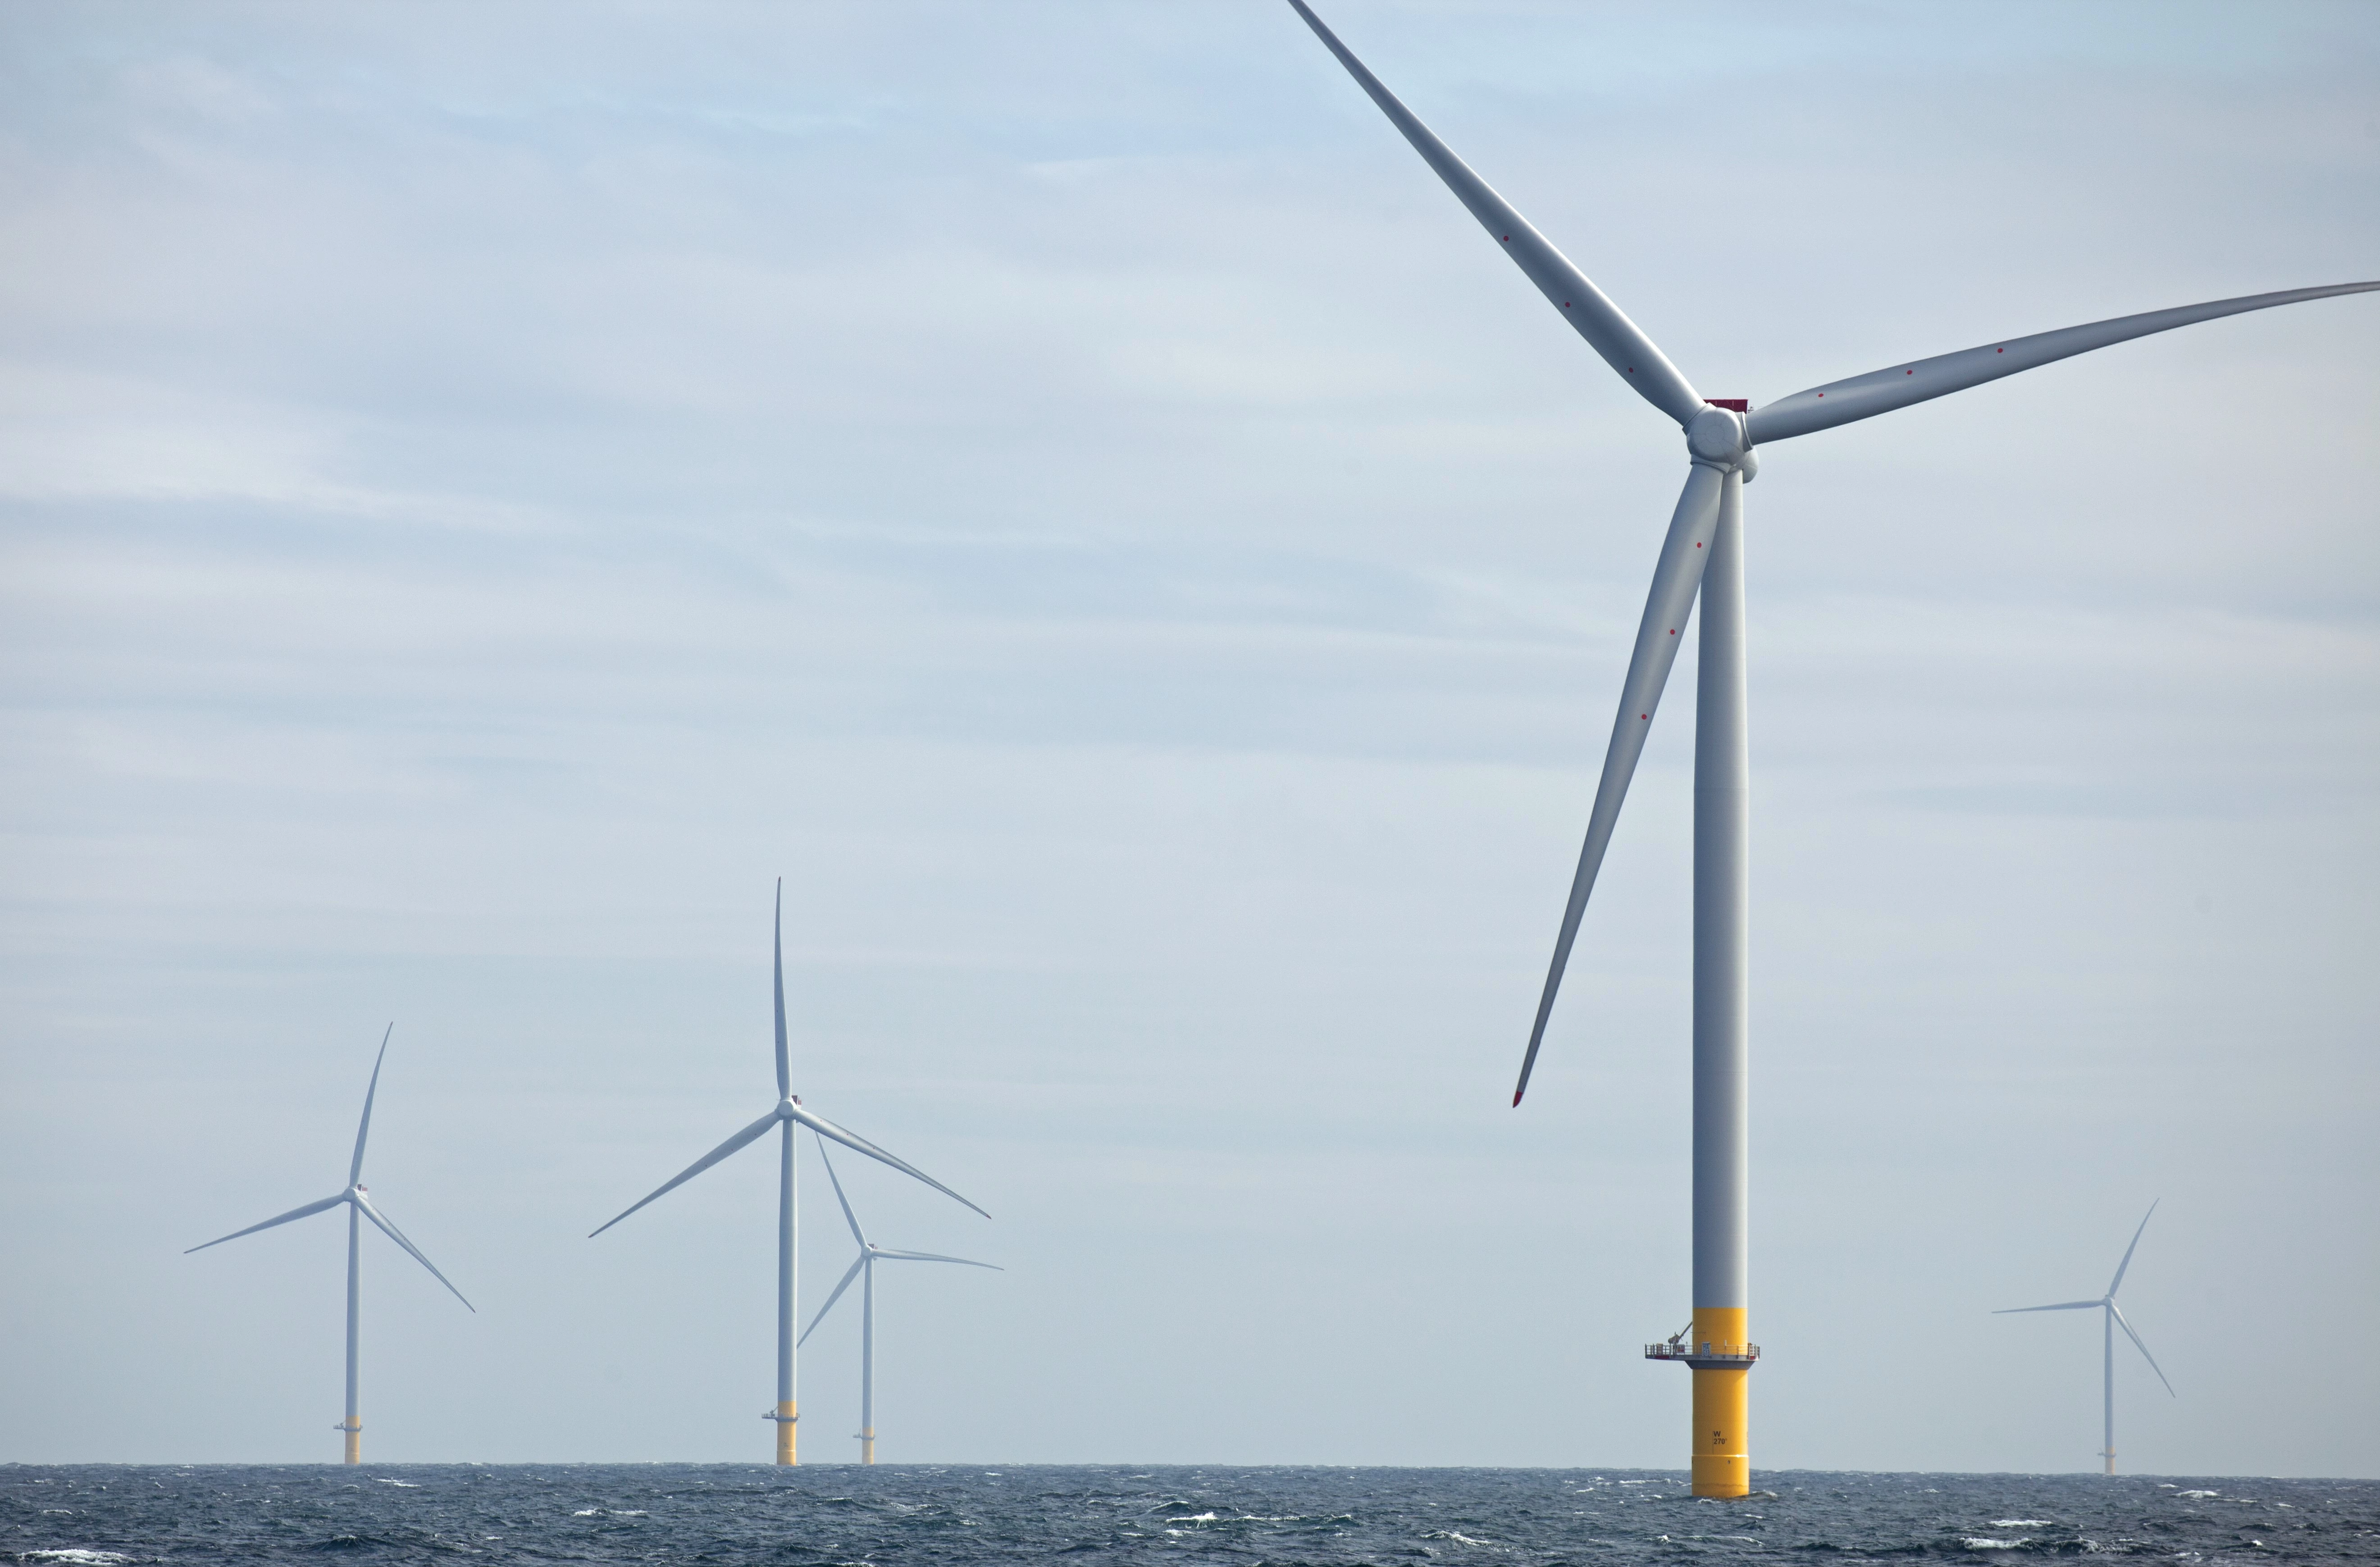 A Shot Of Turbines On The Hornsea Offshore Wind Farms2 (002)